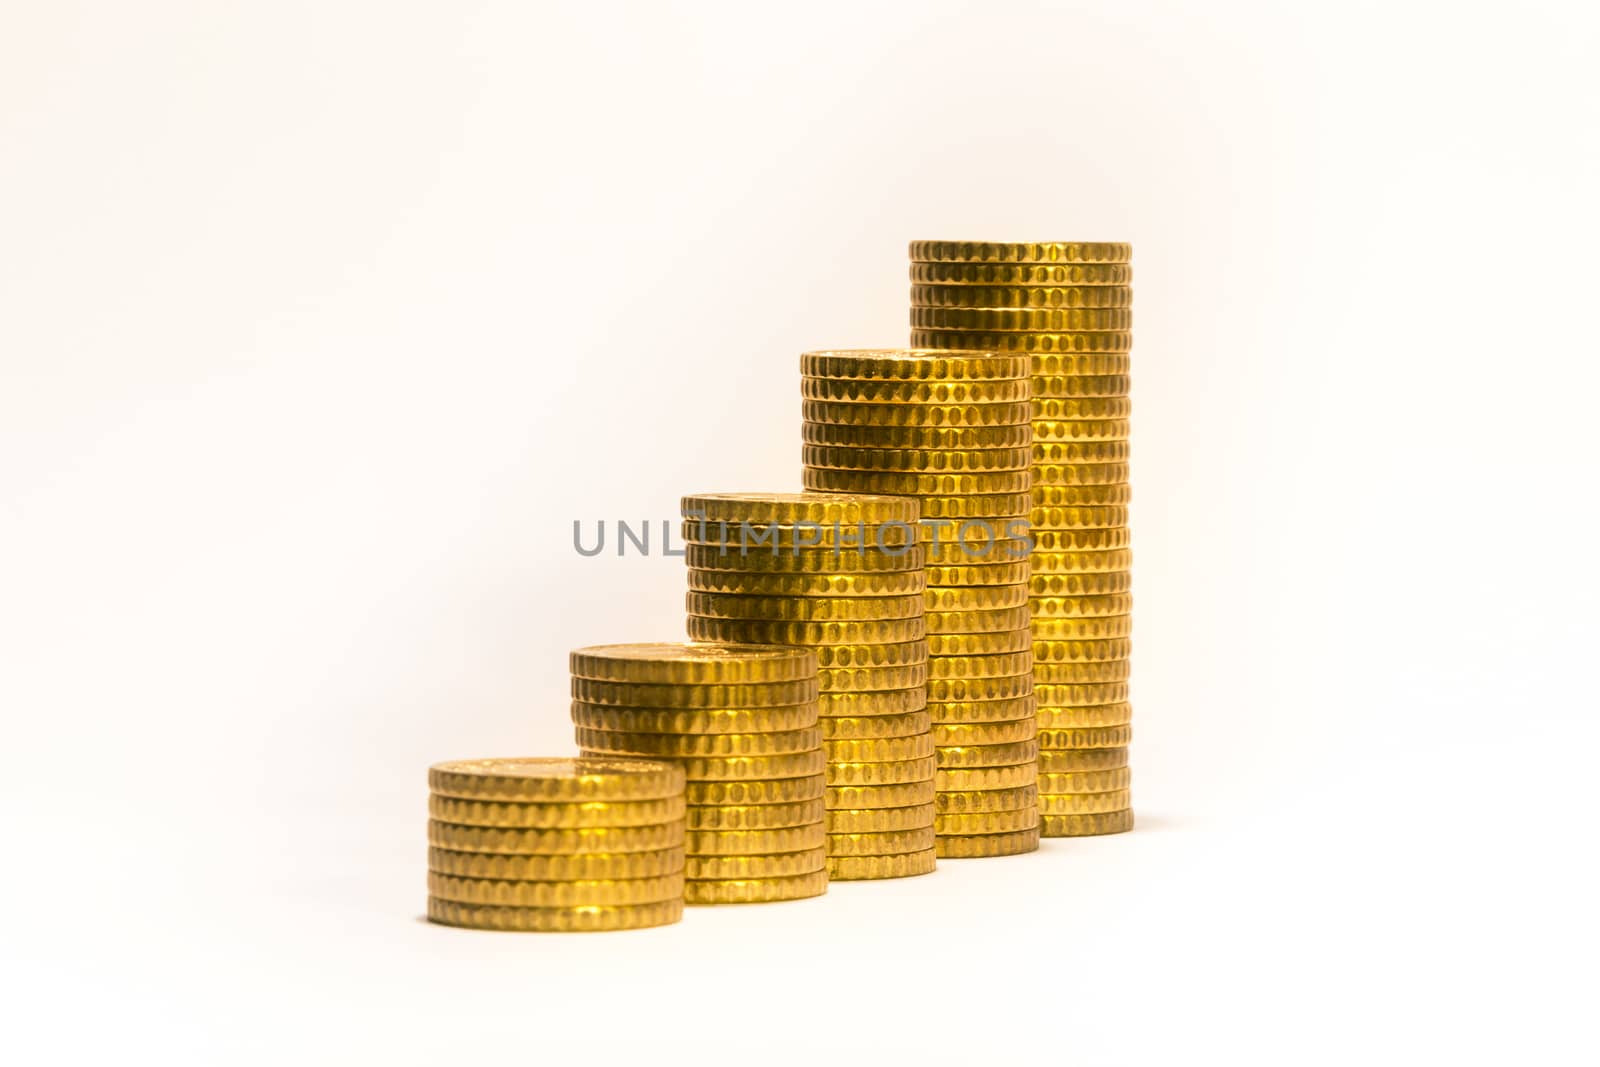 Yellow coins lined up from short to tall stacks by enrico.lapponi